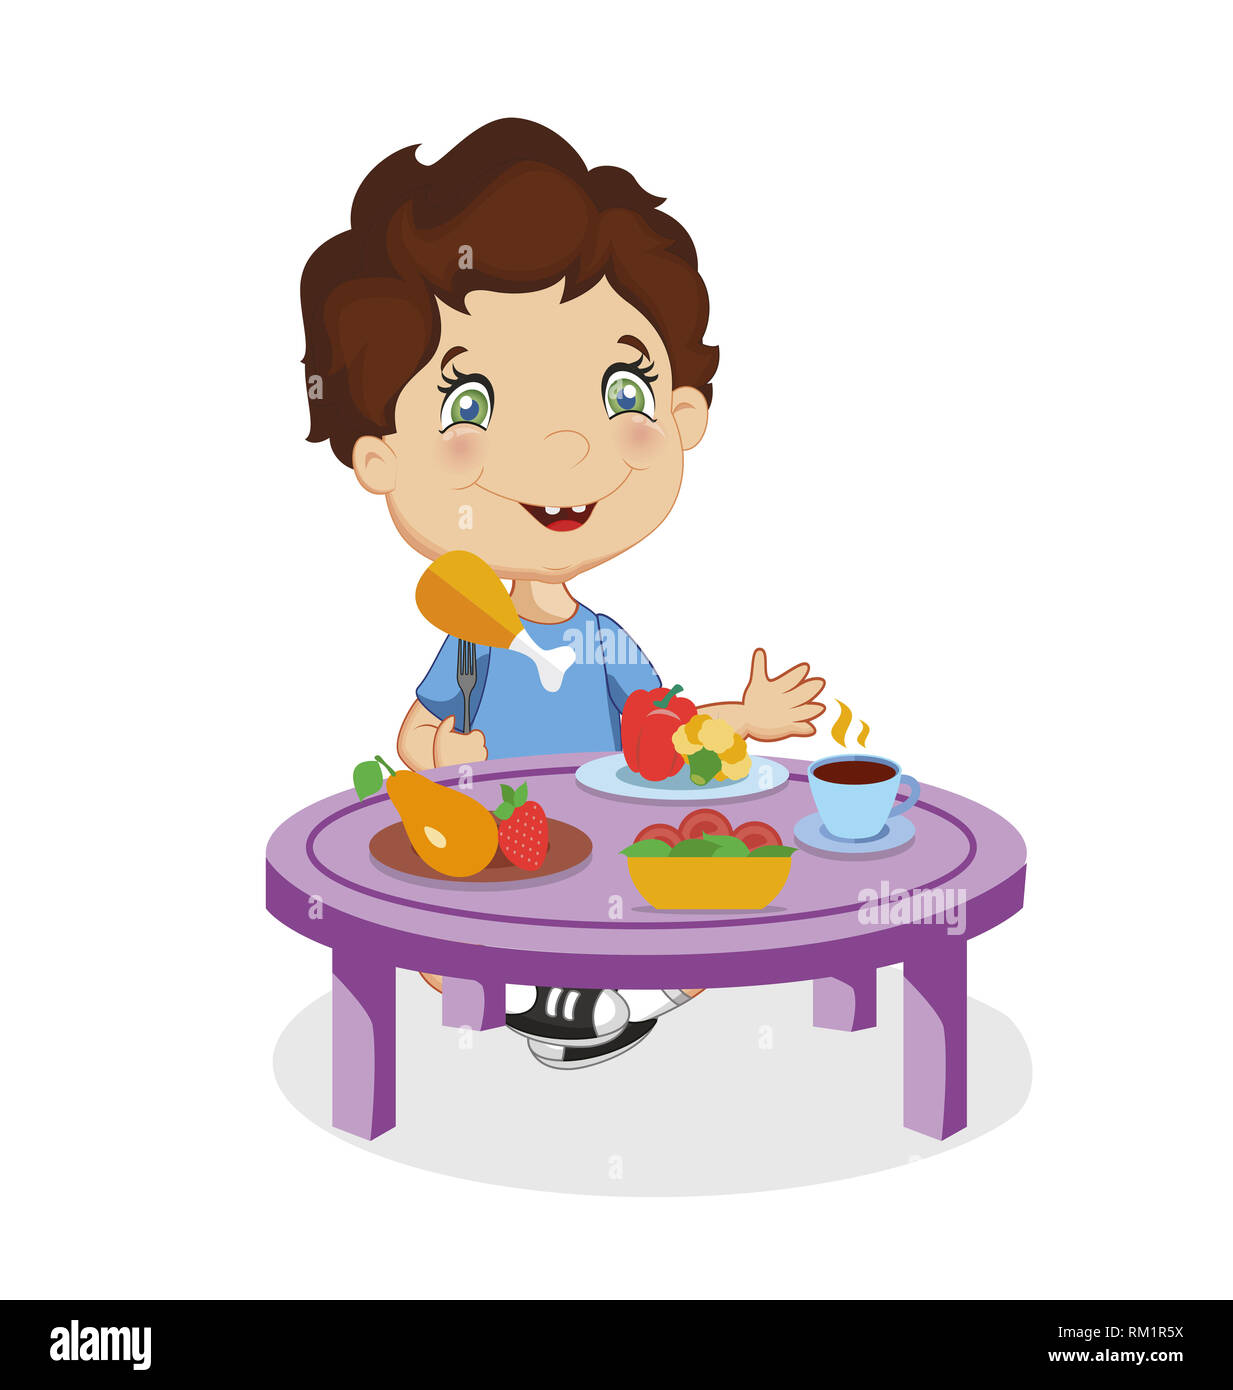 Funny Smiling Cartoon Boy with Brown Hair and Blue Eyes Eating Chiken Sitting at Table with Different Food as Vegetable, Fruit Isolated on White Backg Stock Photo